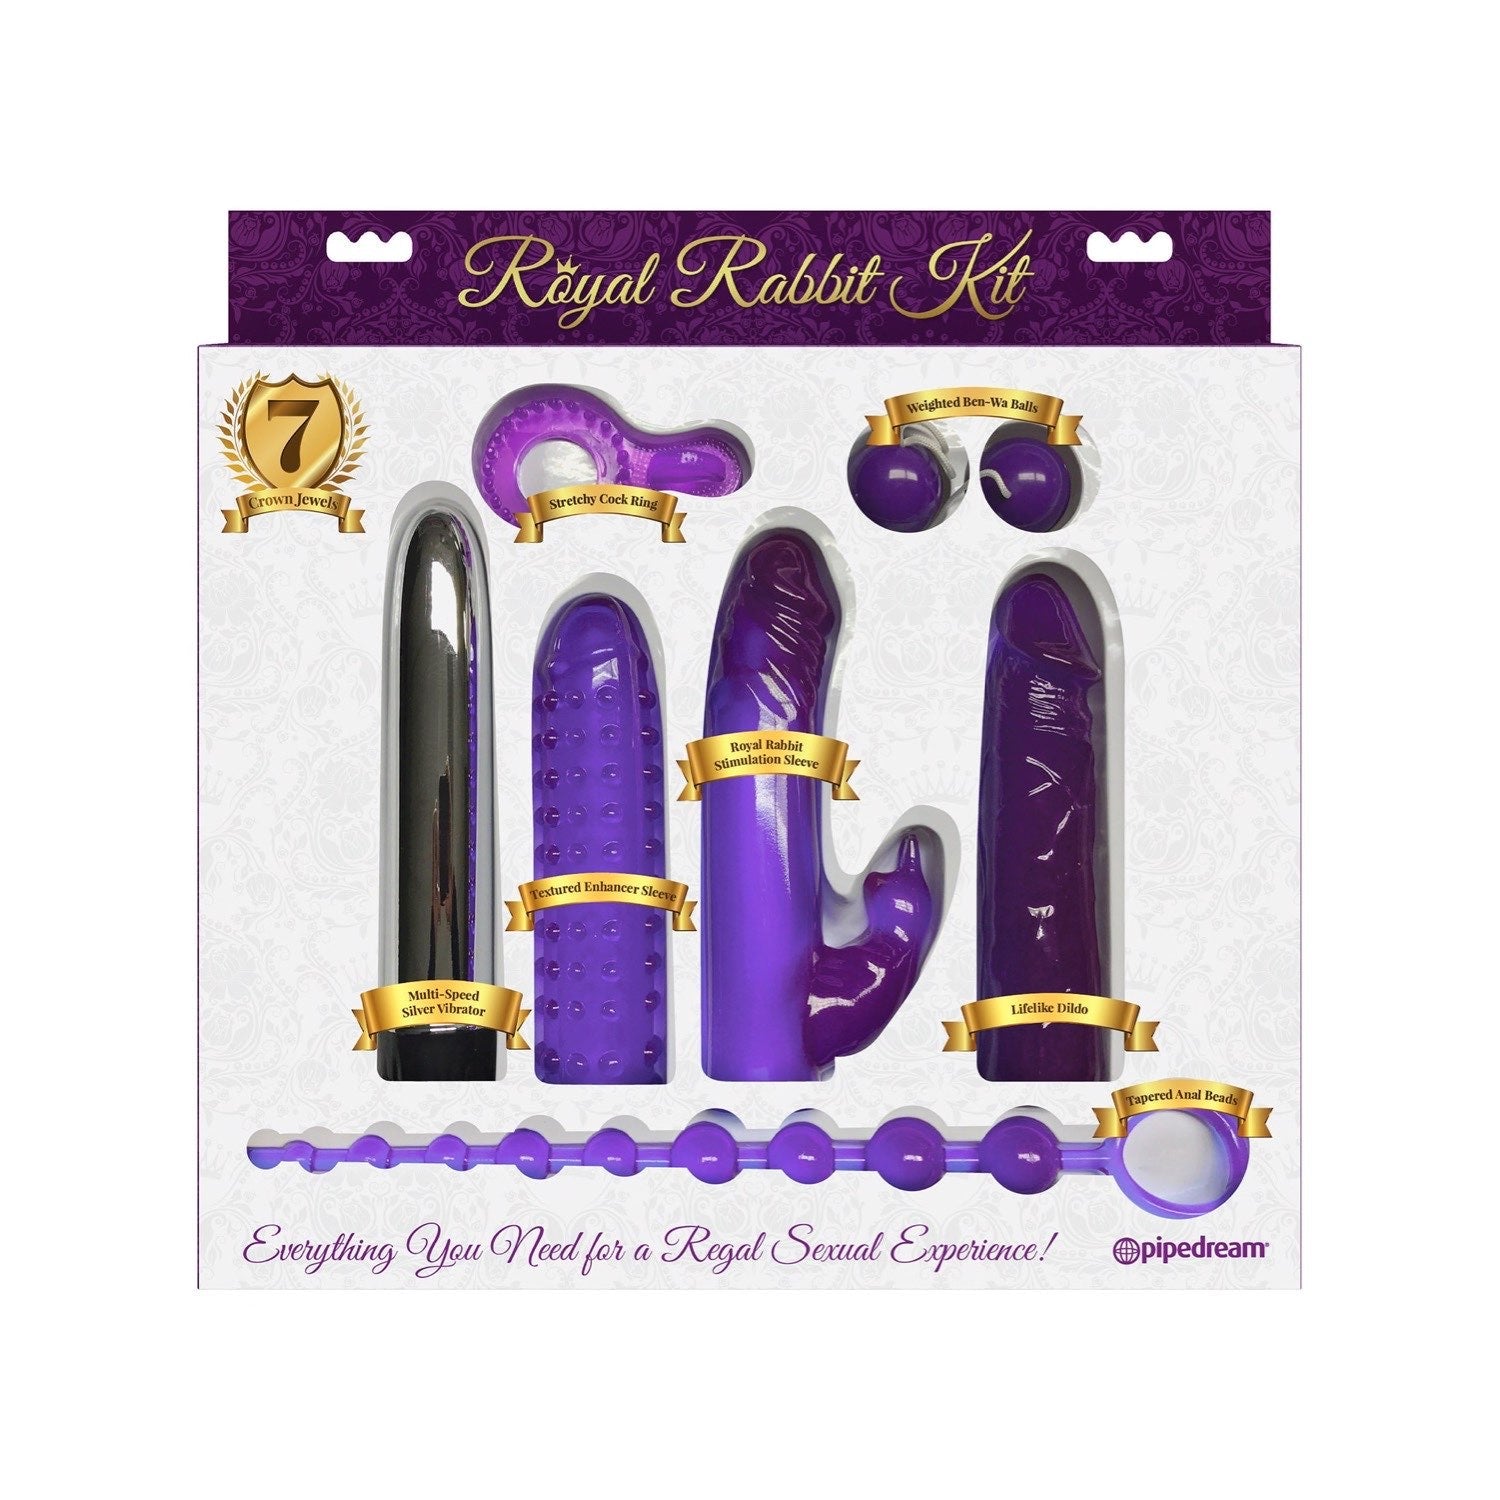  Royal Rabbit Kit - 7 Piece Kit by Pipedream